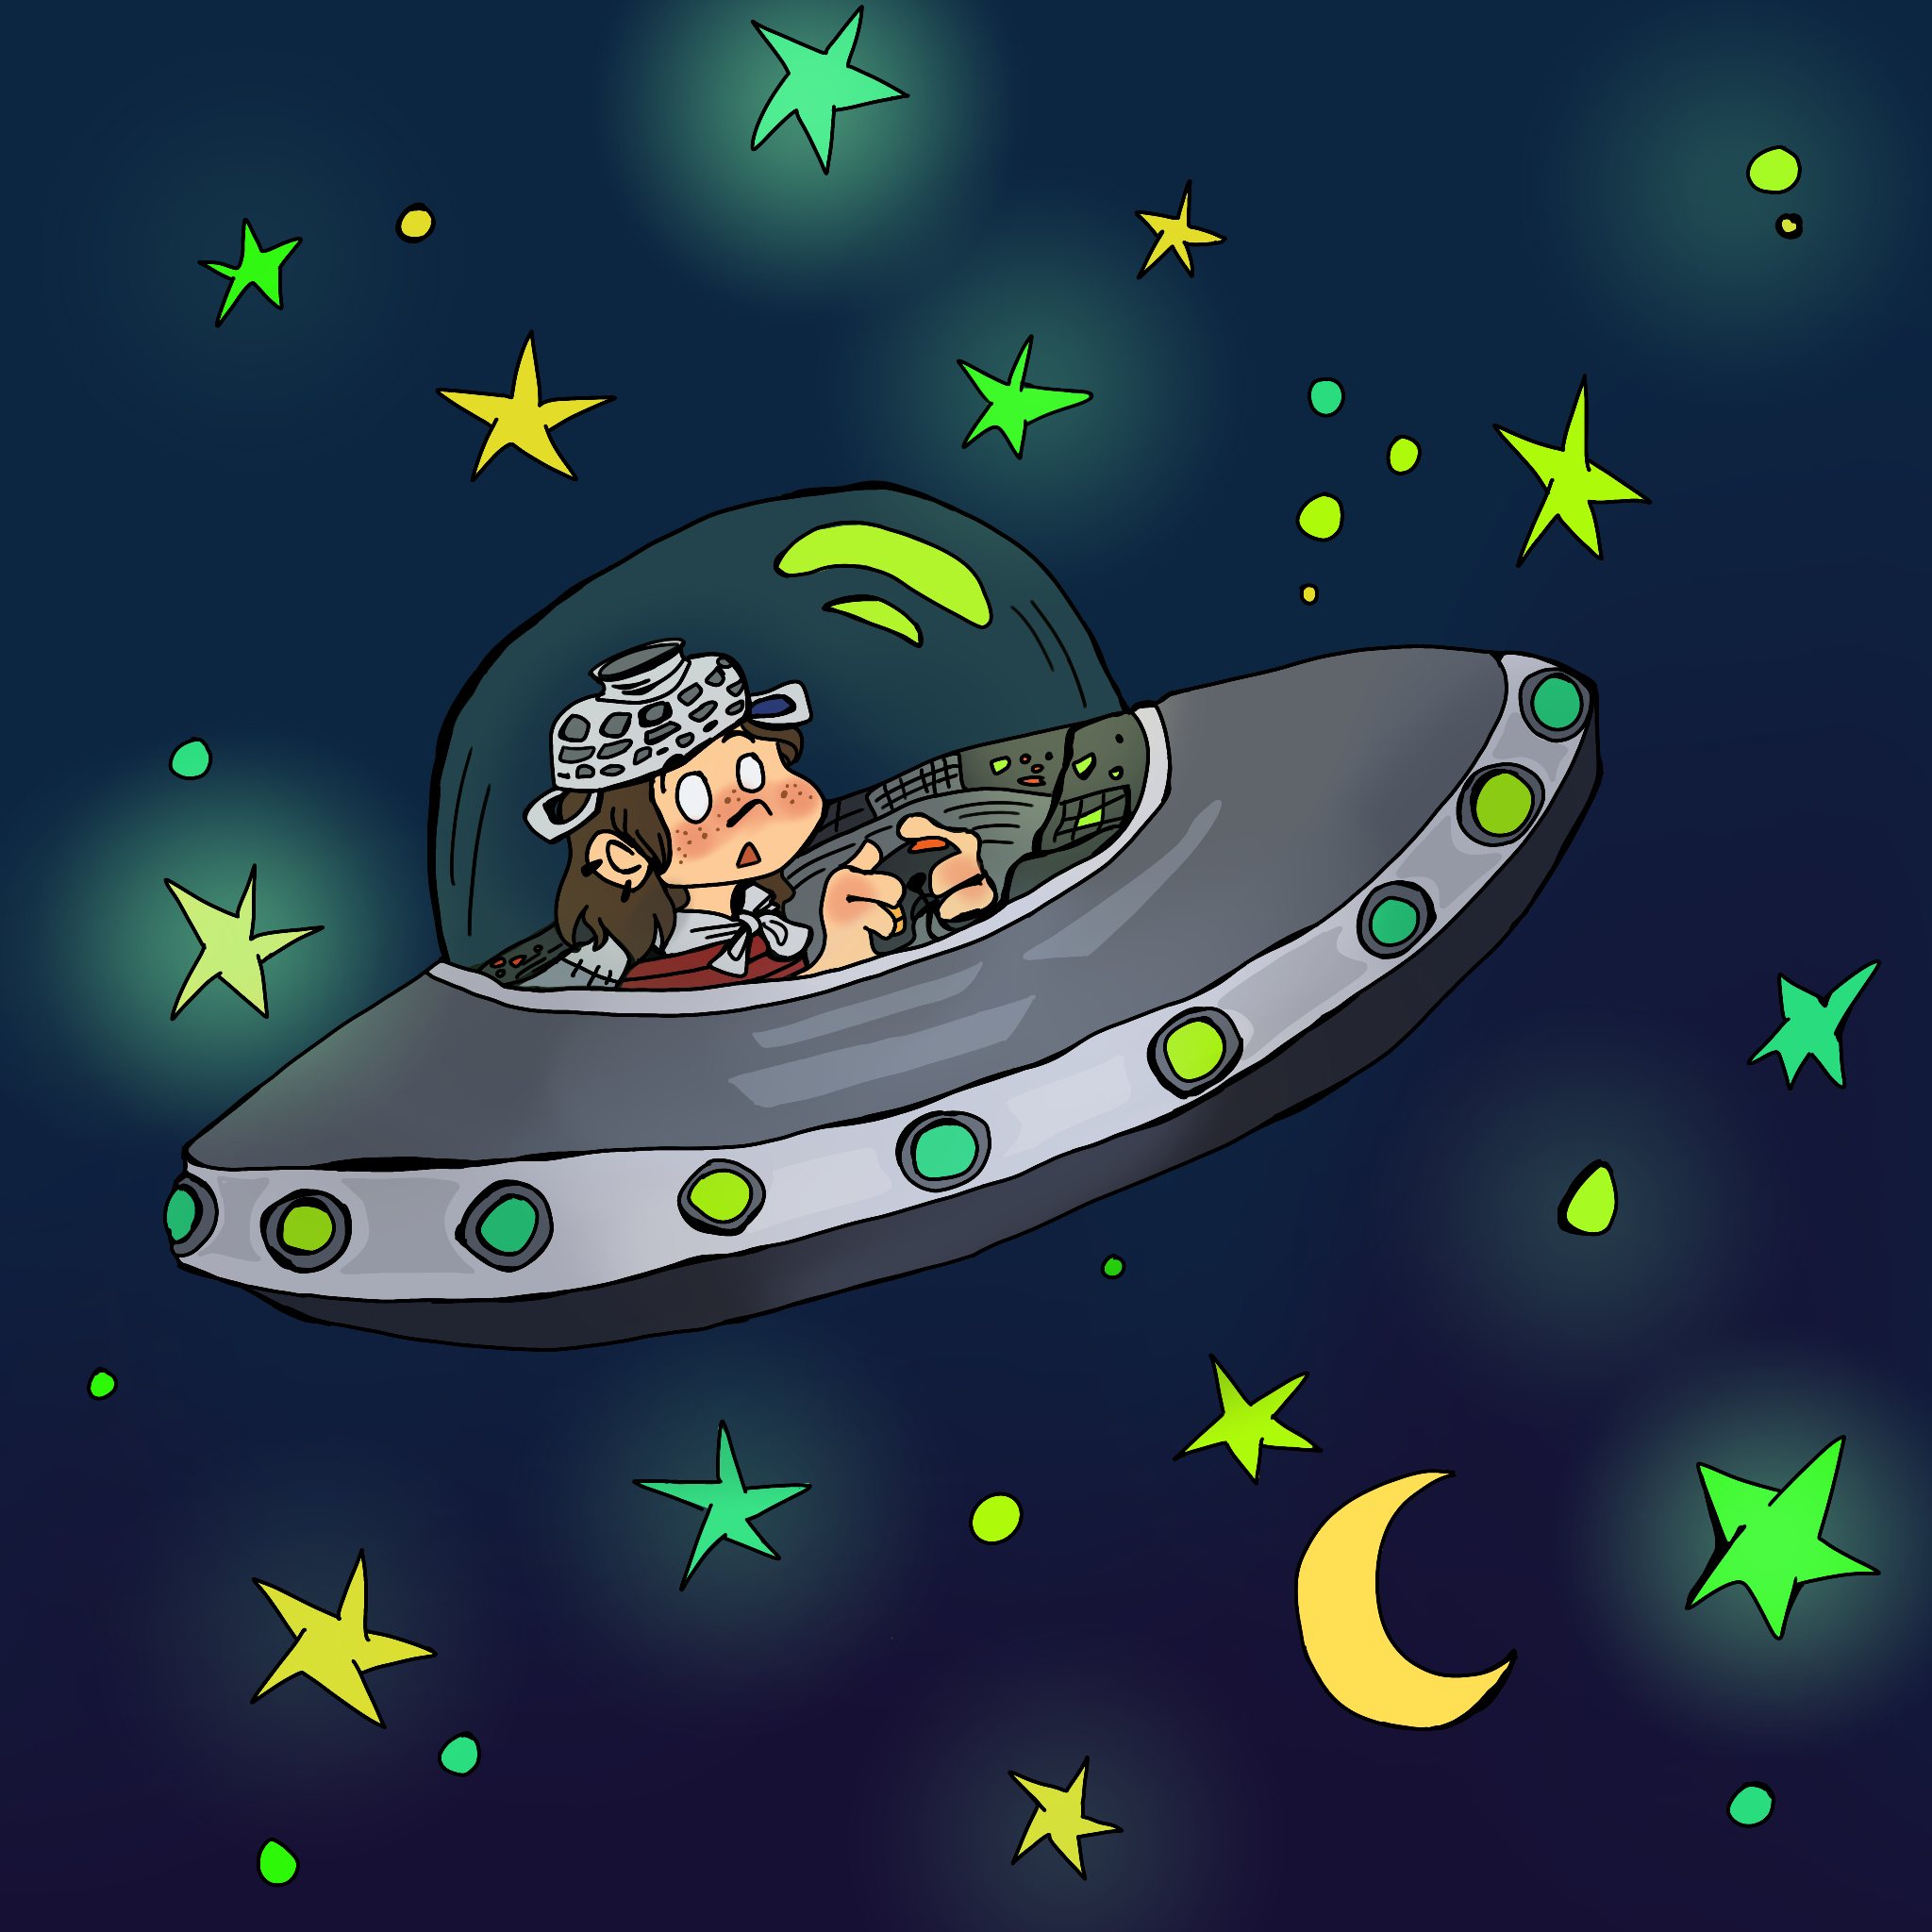 Kelly in a spaceship, Calvin and Hobbes inspired